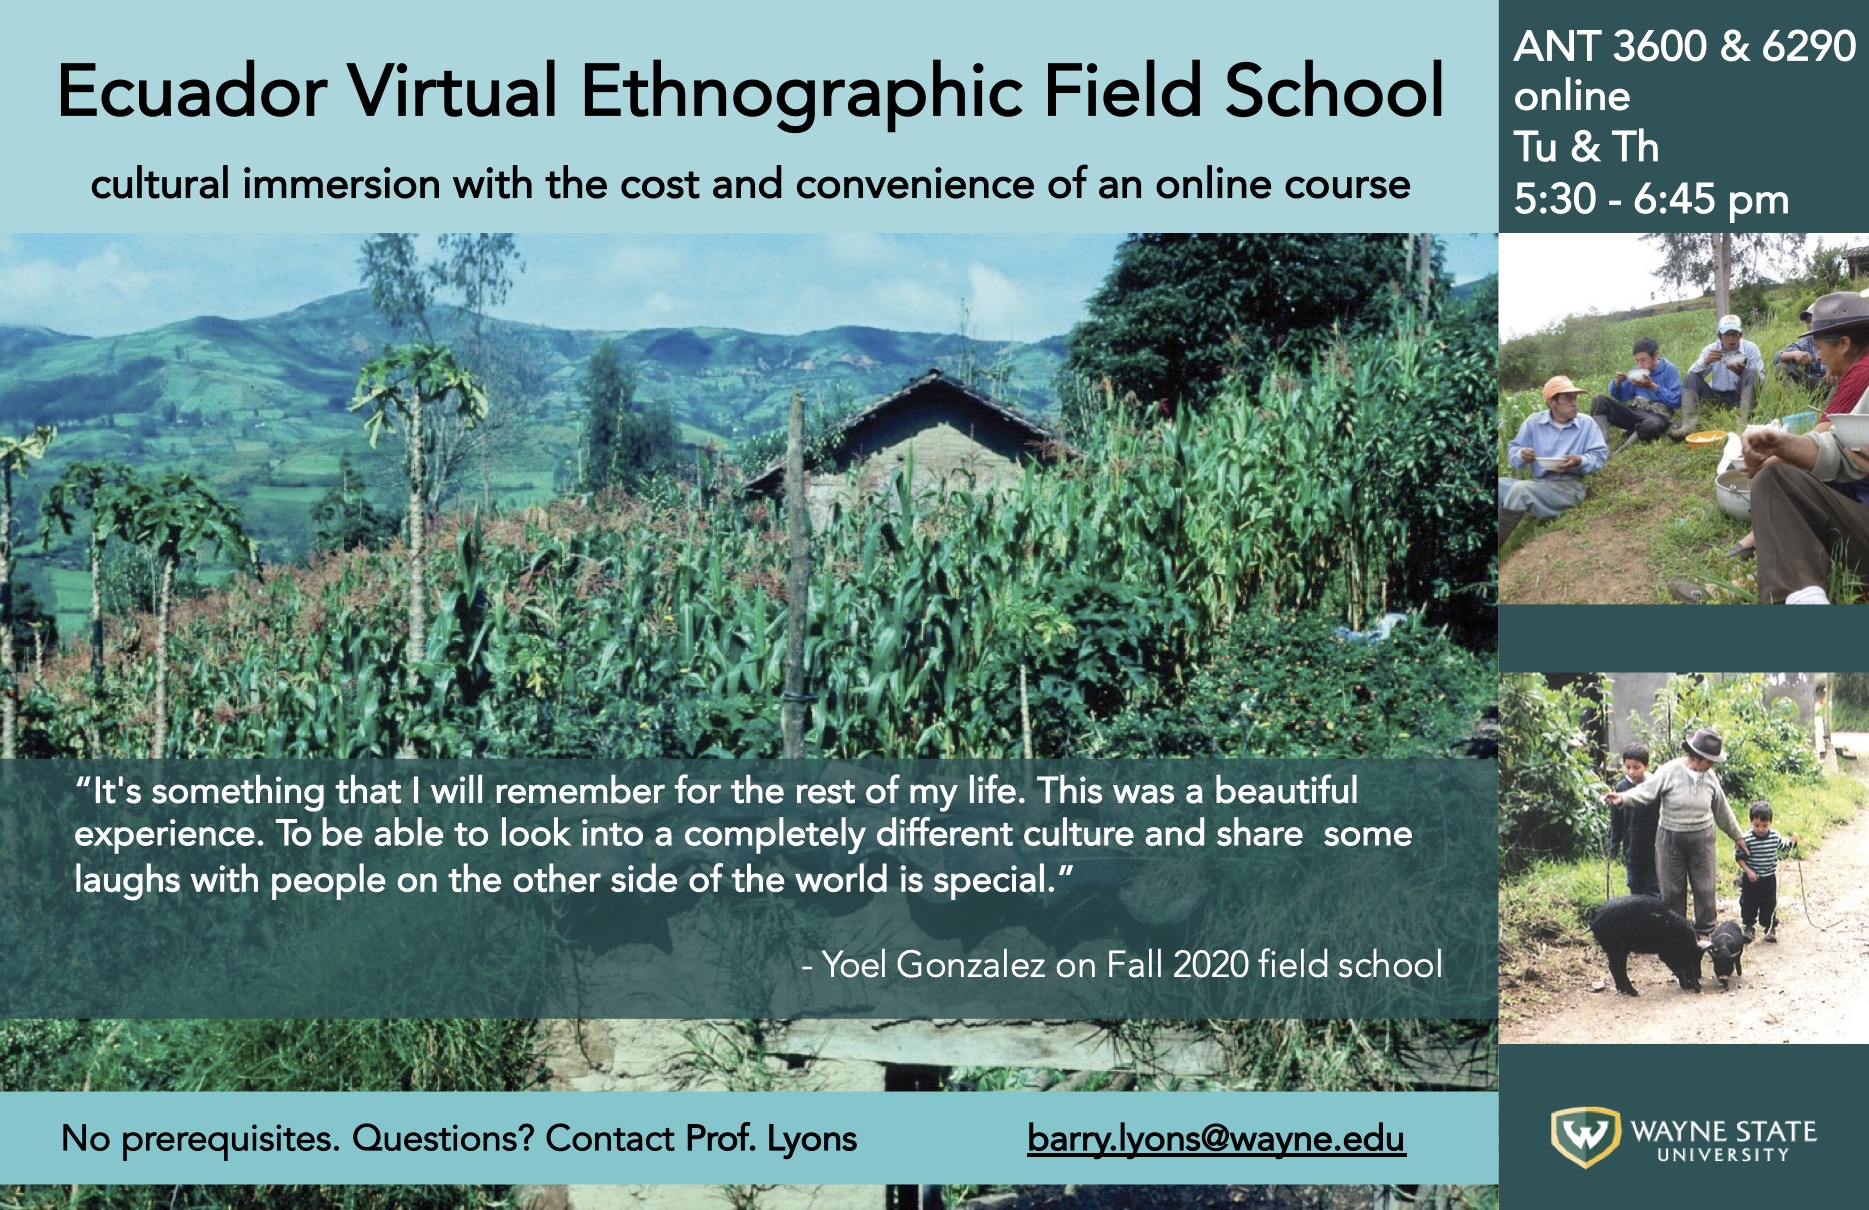 Ecuador Virtual Ethnographic Field School Anthropological field school with the cost and convenience of an online course  If interested contact Dr. Barry Lyons barry.lyons@wayne.edu  Course Description  ANT 3600 and 6290 3 Credit Course  Jan. 11 - May 3 Class meets on Zoom Tu & Th 5:30-6:45 ET  This course taught online from Ecuador, immerses students virtually in the culture of an Andean village. Students connect with villagers through Zoom and WhatsApp, practicing language skills while learning about rural livelihoods and sustainability in the context of climate change and globalization.  • Develop anthropological research skills  •Analyze economic and environmental challenges in rural Latin America  •Improve Spanish language skills  •Explore and meet requirements in anthropology, global studies, Spanish, Latin American studies  • Undergraduate and graduate levels  • Prerequisites: At least Intermediate-level Spanish fluency & instructor permission.  Contact barry.lyons@wayne.edu  Location  San Vicente de Bolívar is a Spanish-speaking village in the Andes mountains, at 8,000 feet above sea level. Farmers in San Vicente grow corn on modest plots they own or sharecrop. They face multiple challenges including low prices for their corn, declining agricultural fertility, new crop diseases, dependence on expensive and harmful chemical fertilizers and pesticides, and disruptions to normal weather patterns associated with climate change. Our research aims to understand the social and cultural dimensions of these challenges and ultimately help to develop economically and environmentally sustainable responses.  “It's something that I will remember for the rest of my life. This was a beautiful experience. To be able to look into a completely different culture and share some laughs with people on the other side of the world is special.” - Yoel Gonzalez on Fall 2020 field school